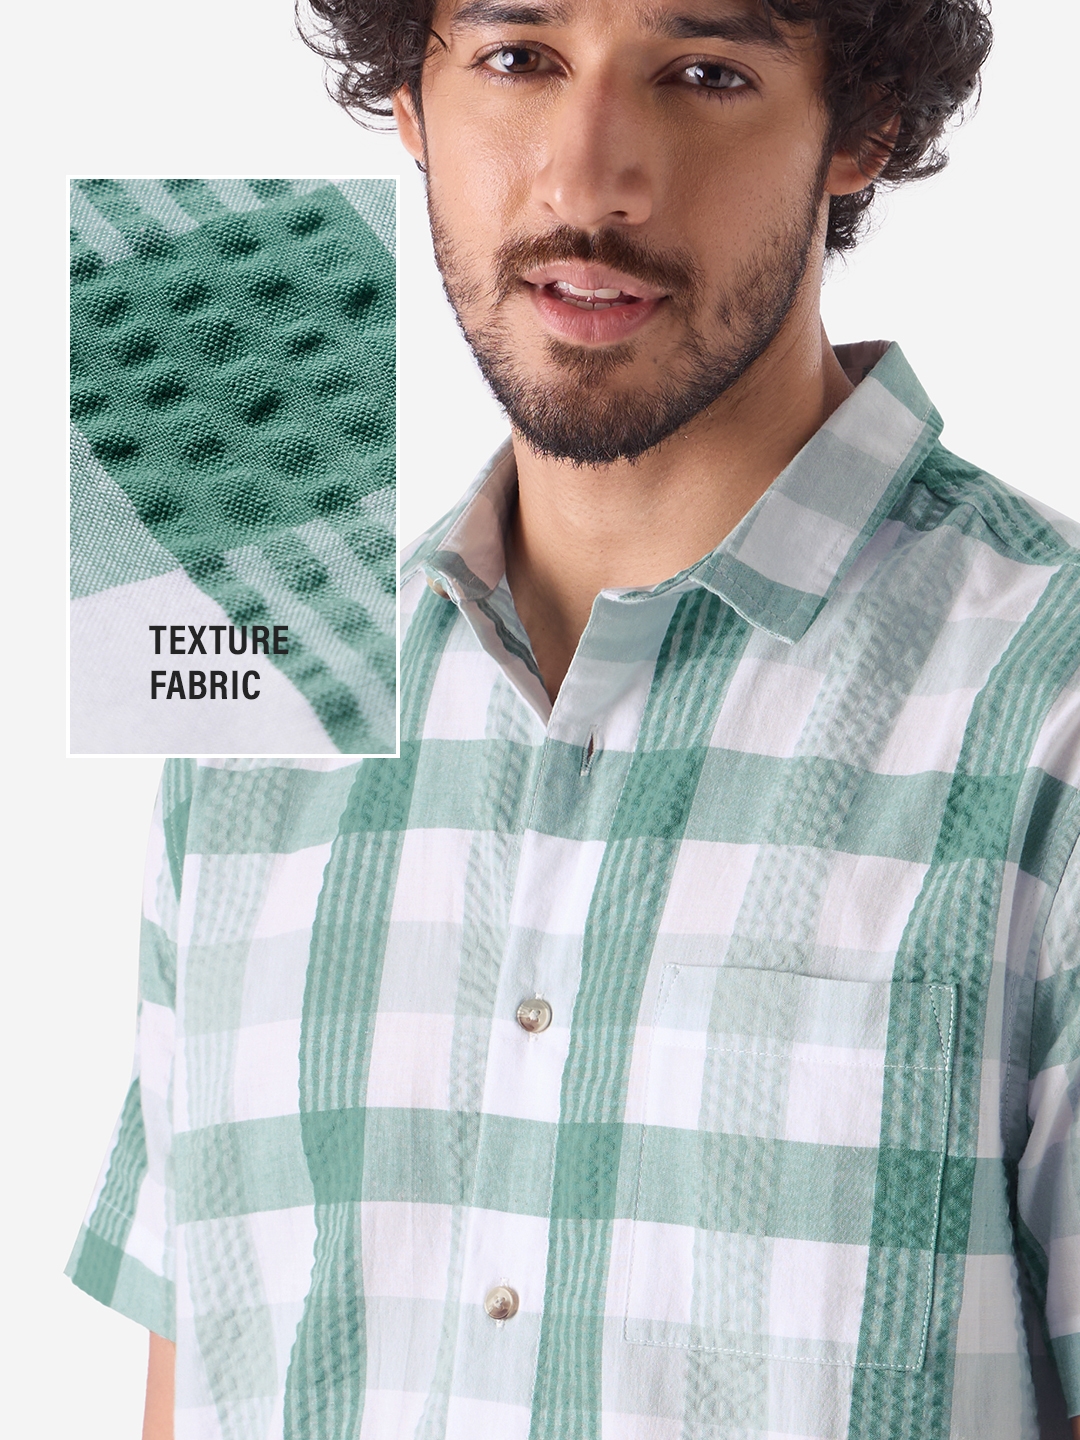 The Souled Store | Men's Plaid: White And Green Men's Textured Shirts